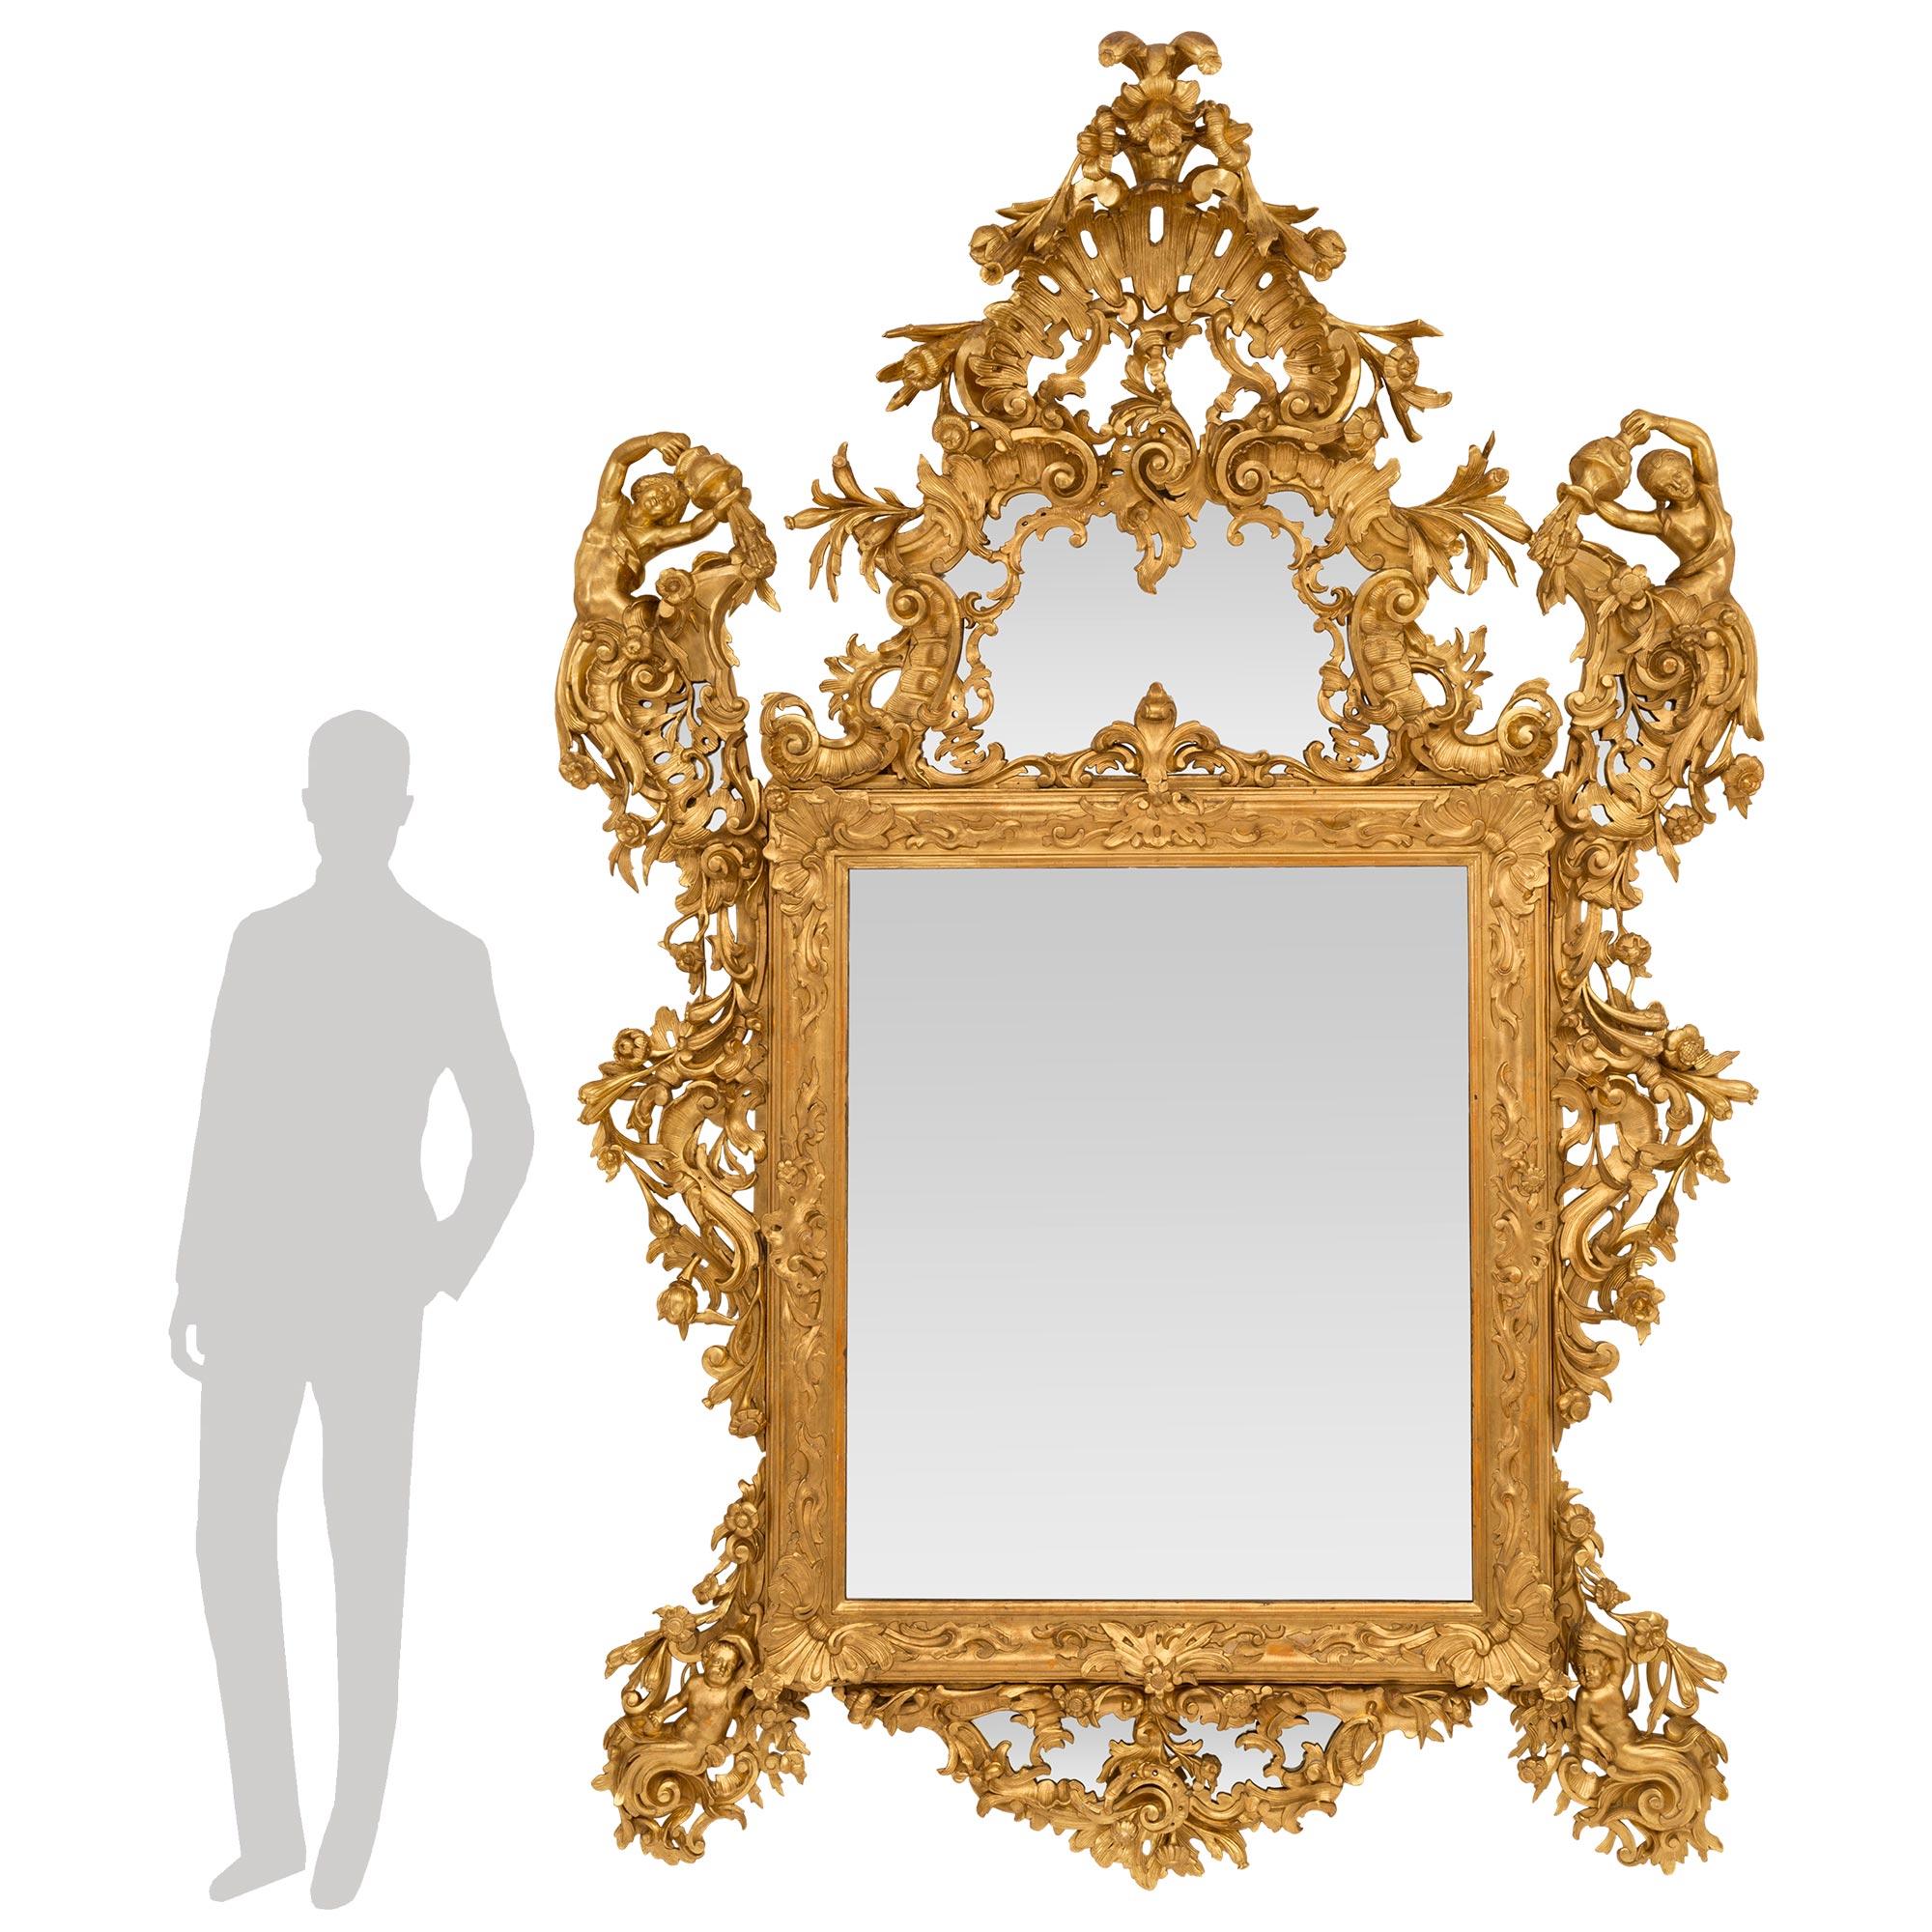 A breathtaking and monumentally scaled Italian 18th century Venetian st. giltwood mirror. The most impressive mirror retains all of its original mirror plates throughout which are set within a dramatic and extremely finely detailed carved giltwood